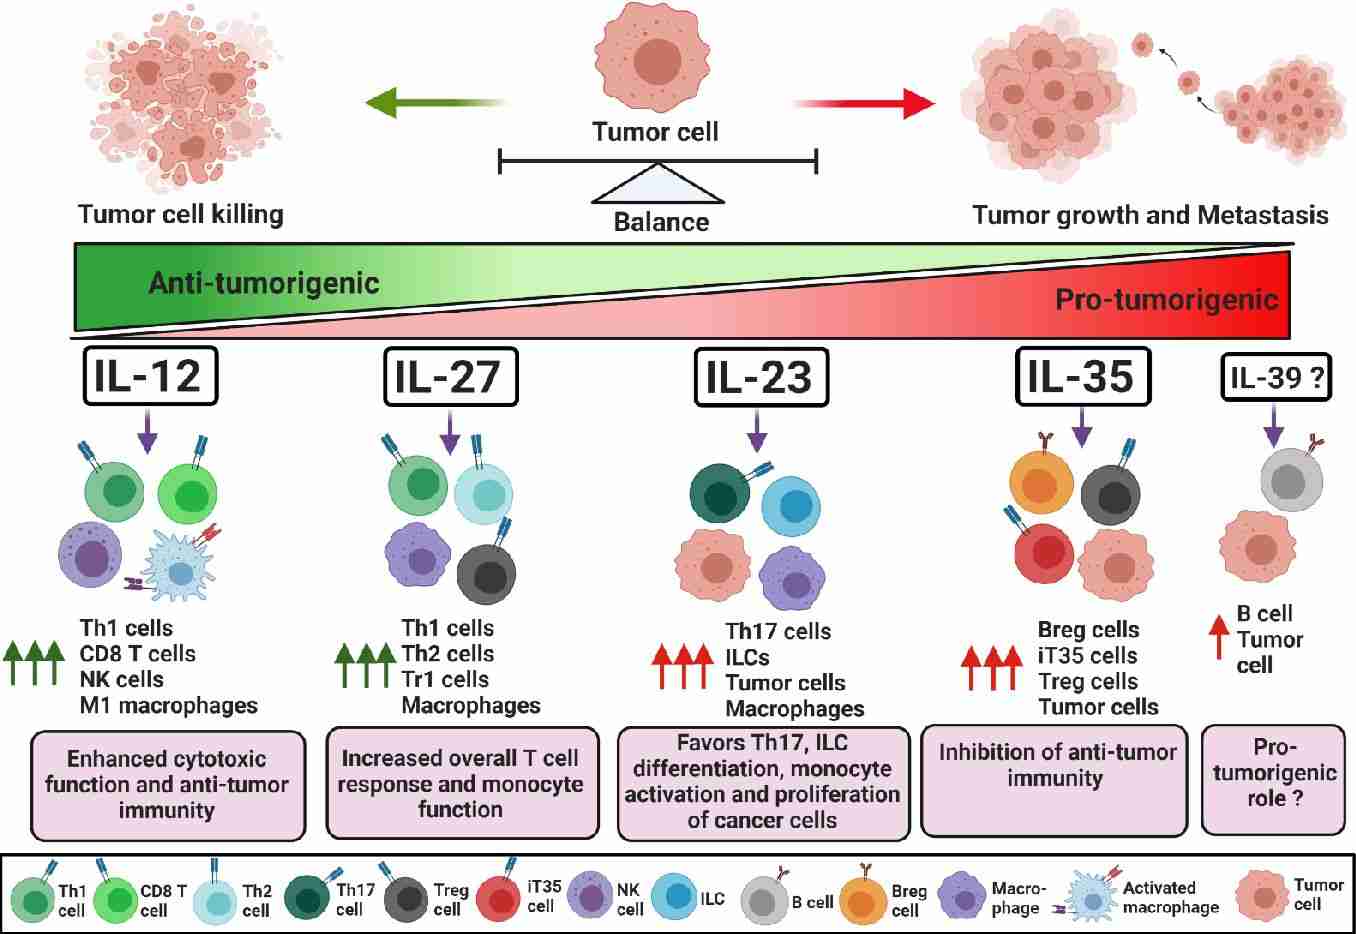 Role of IL-12 family cytokines in maintaining a balance between effector and regulatory immune responses in tumorigenesis.